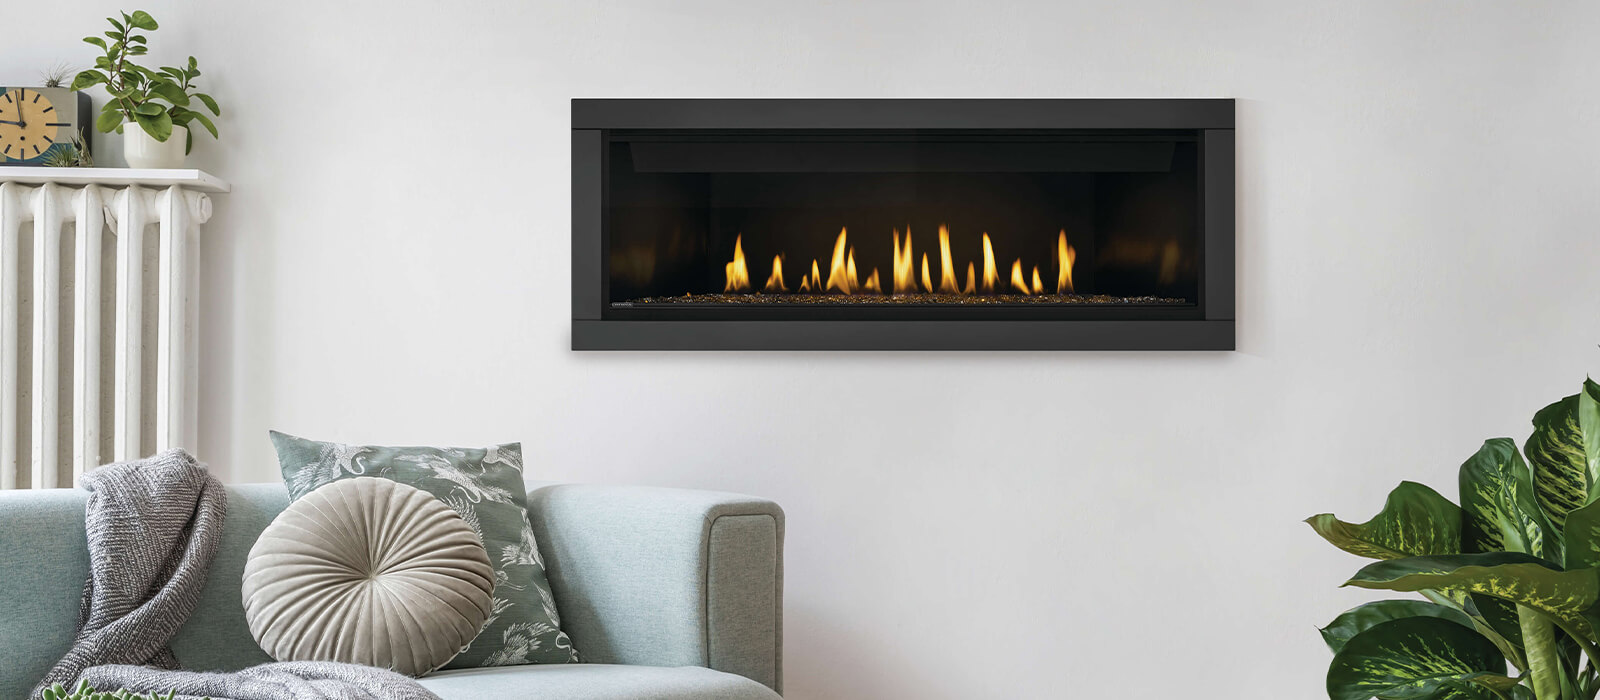 CBL56 - Featuring a clean linear design that provides a stunning focal point